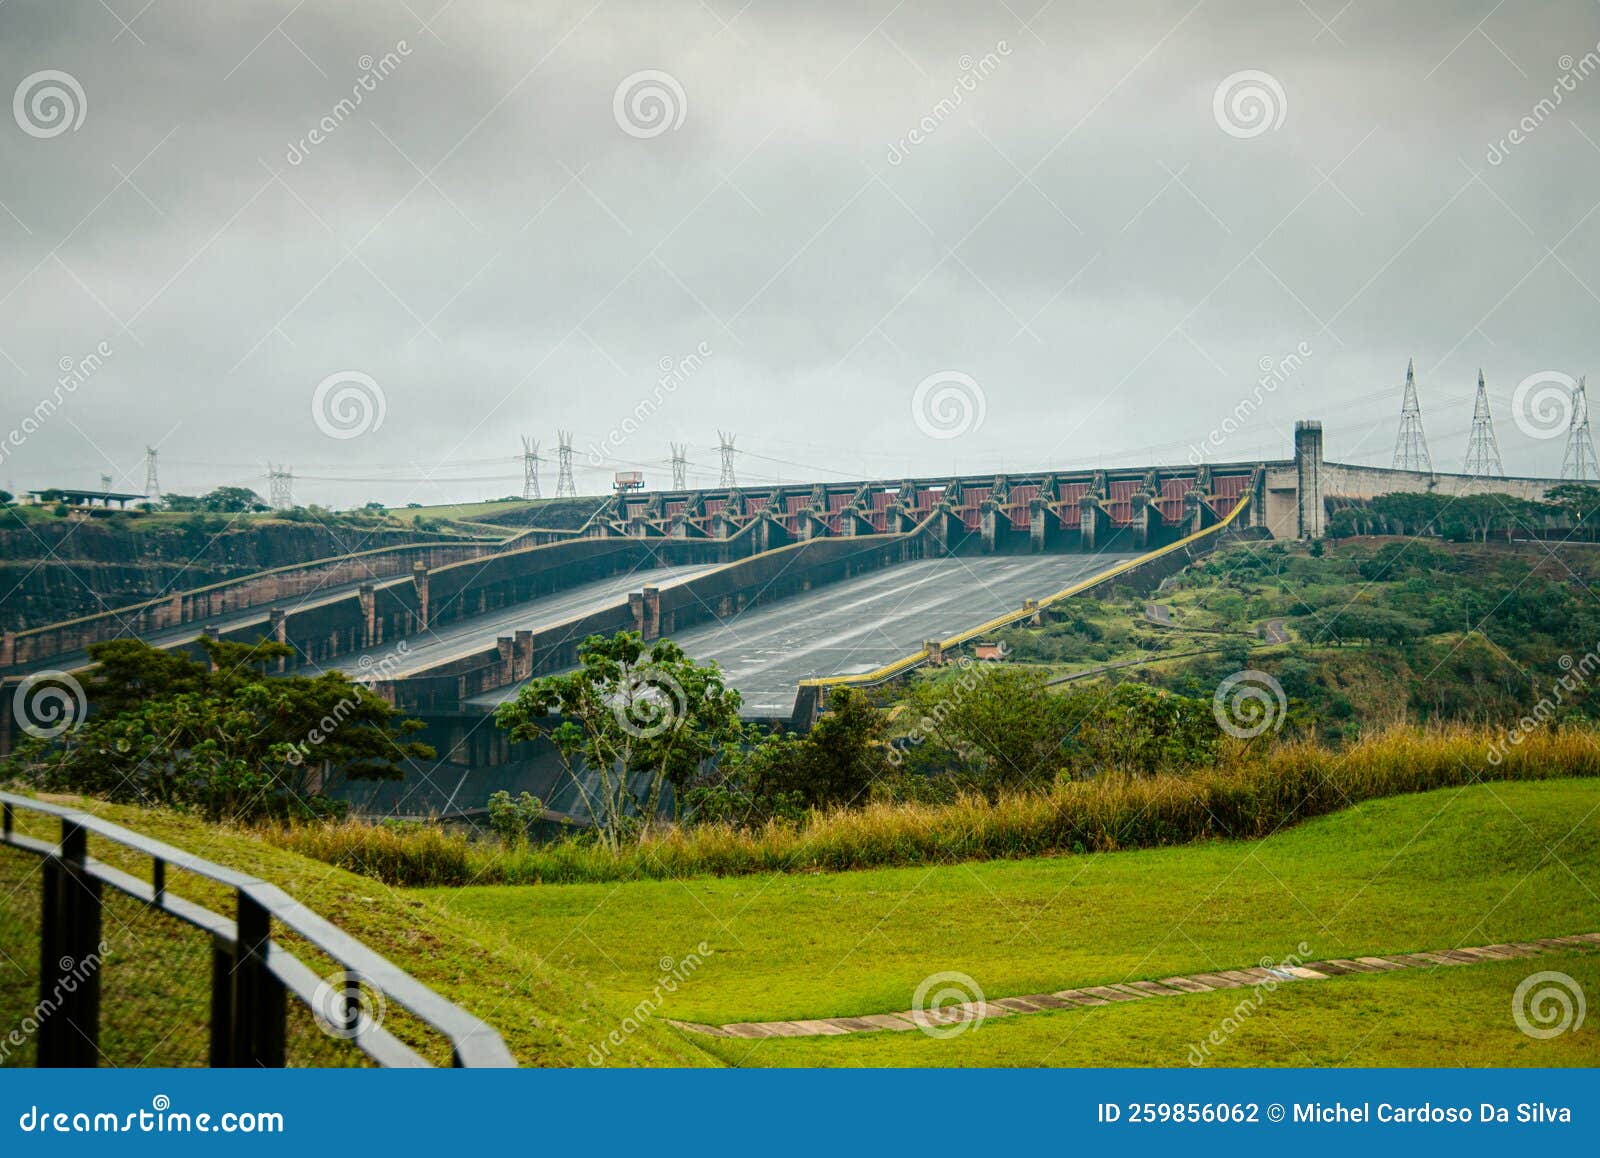 itaipu hydroelectric plant - spillway view